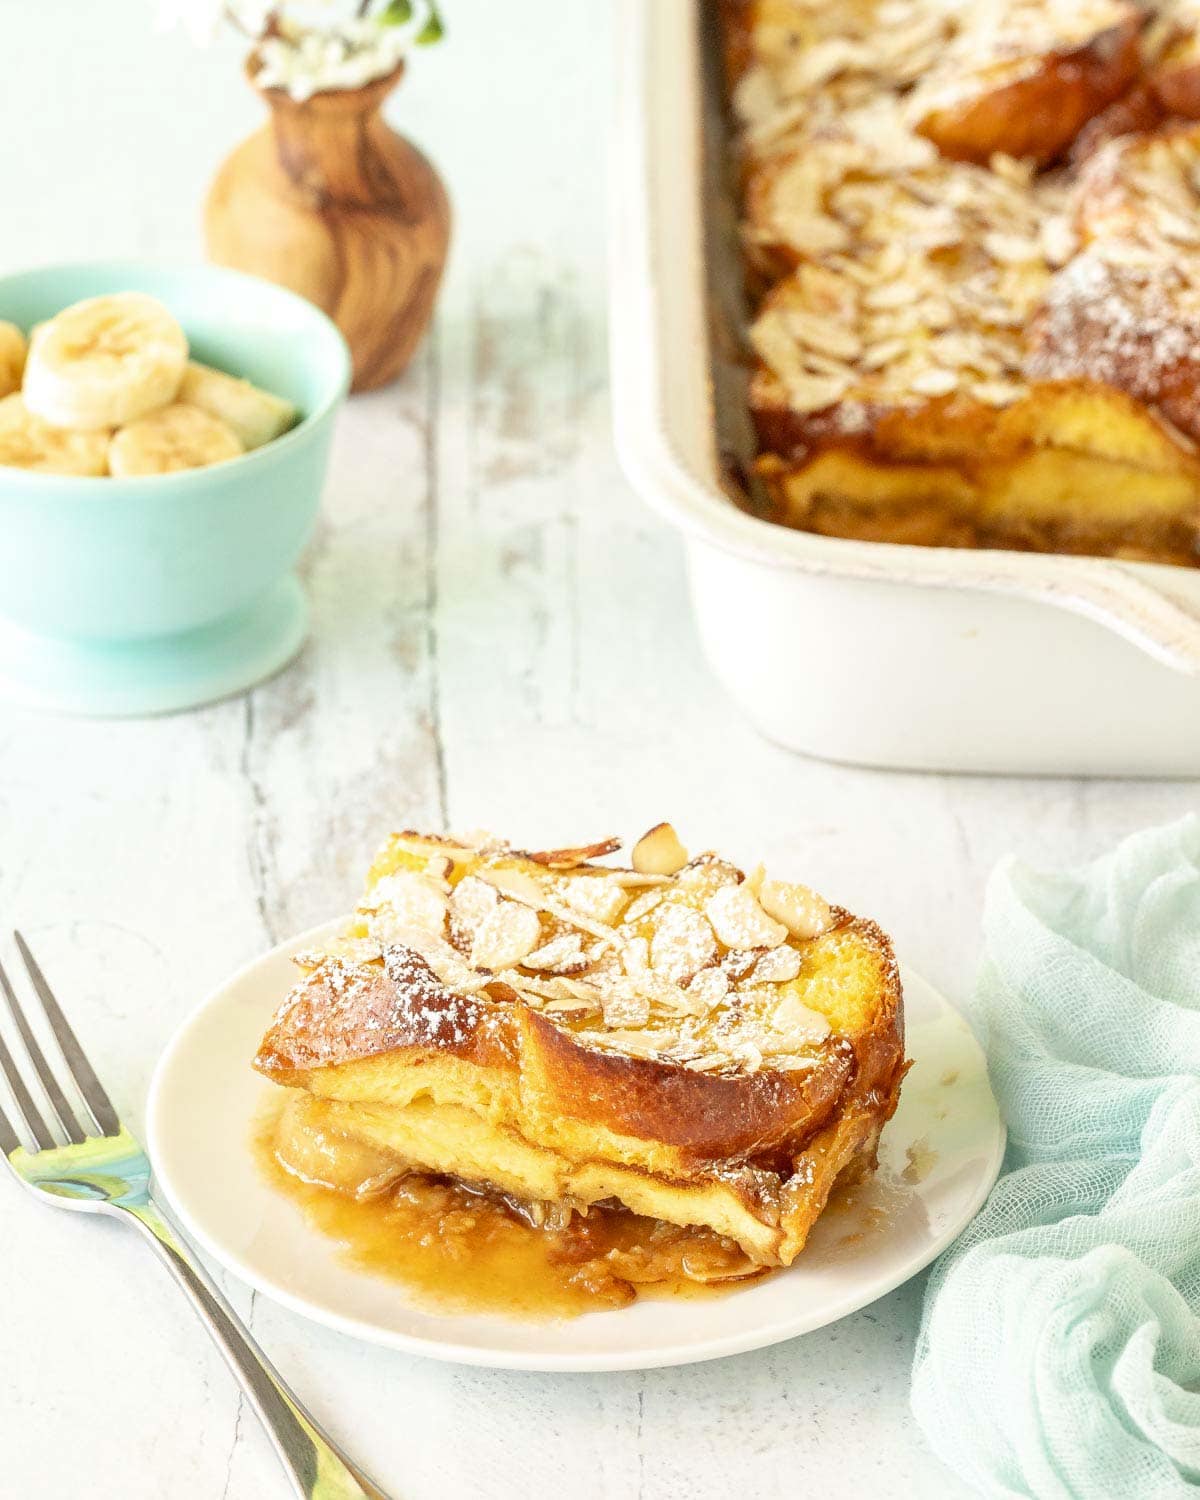 Slice of Baked French Toast on a white plate with rest of casserole in the background alongside bowl of sliced bananas and flowers